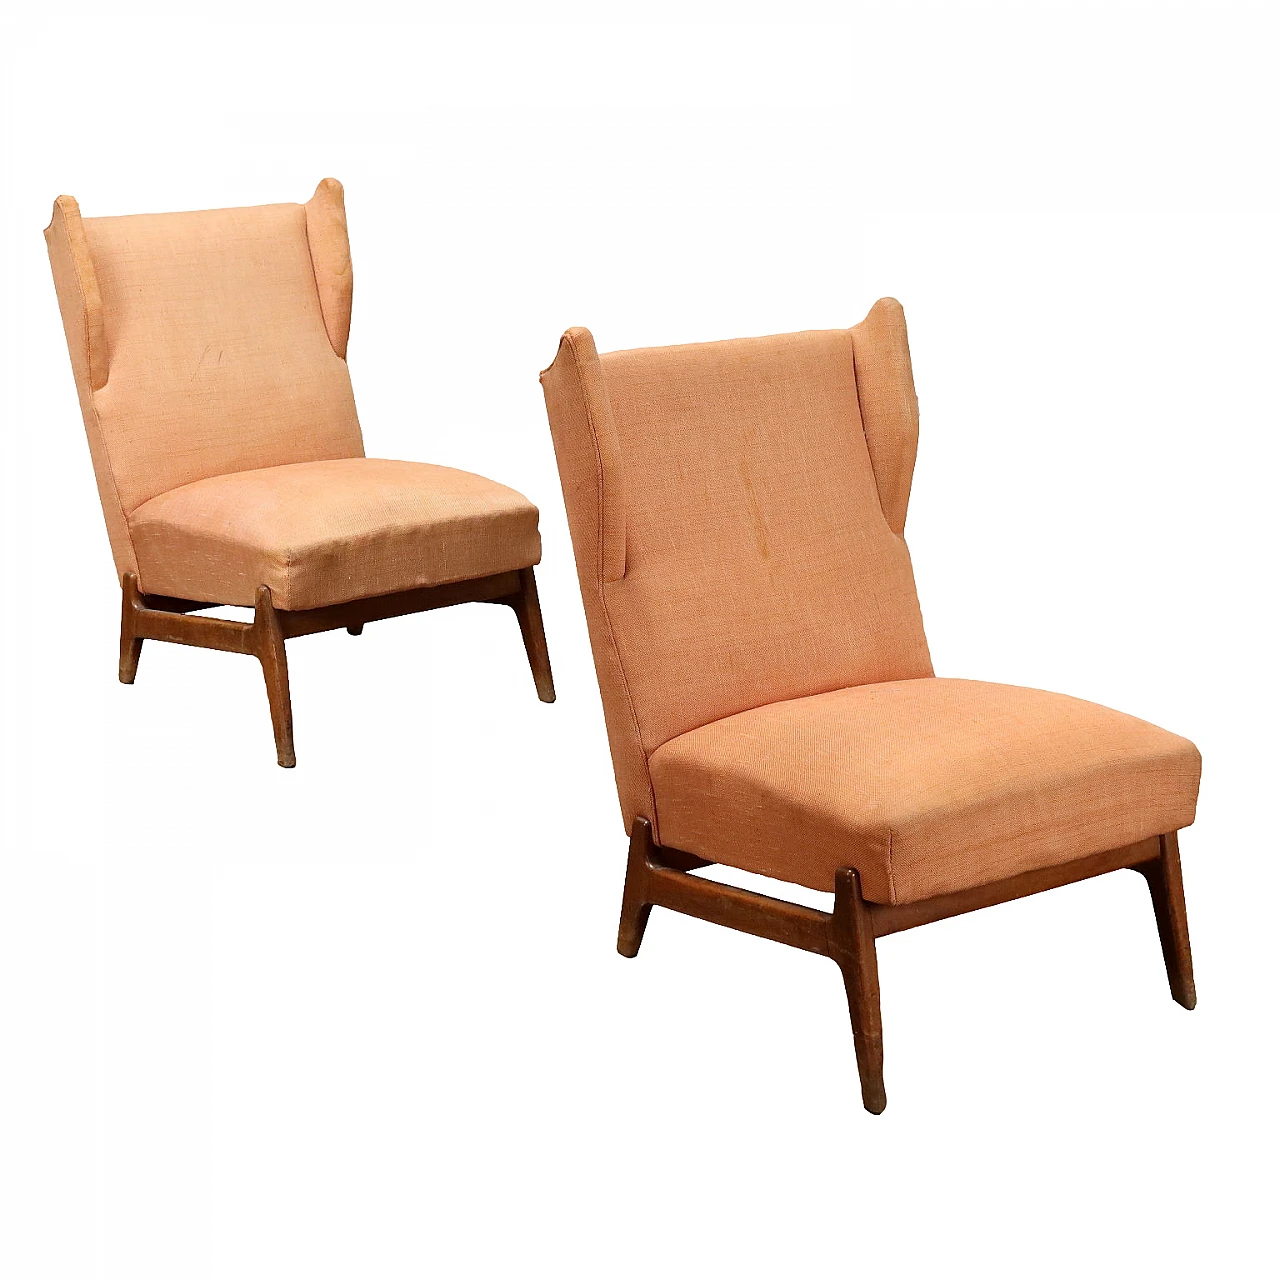 Pair of spring & wooden armchairs with pink fabric, 1950s 1